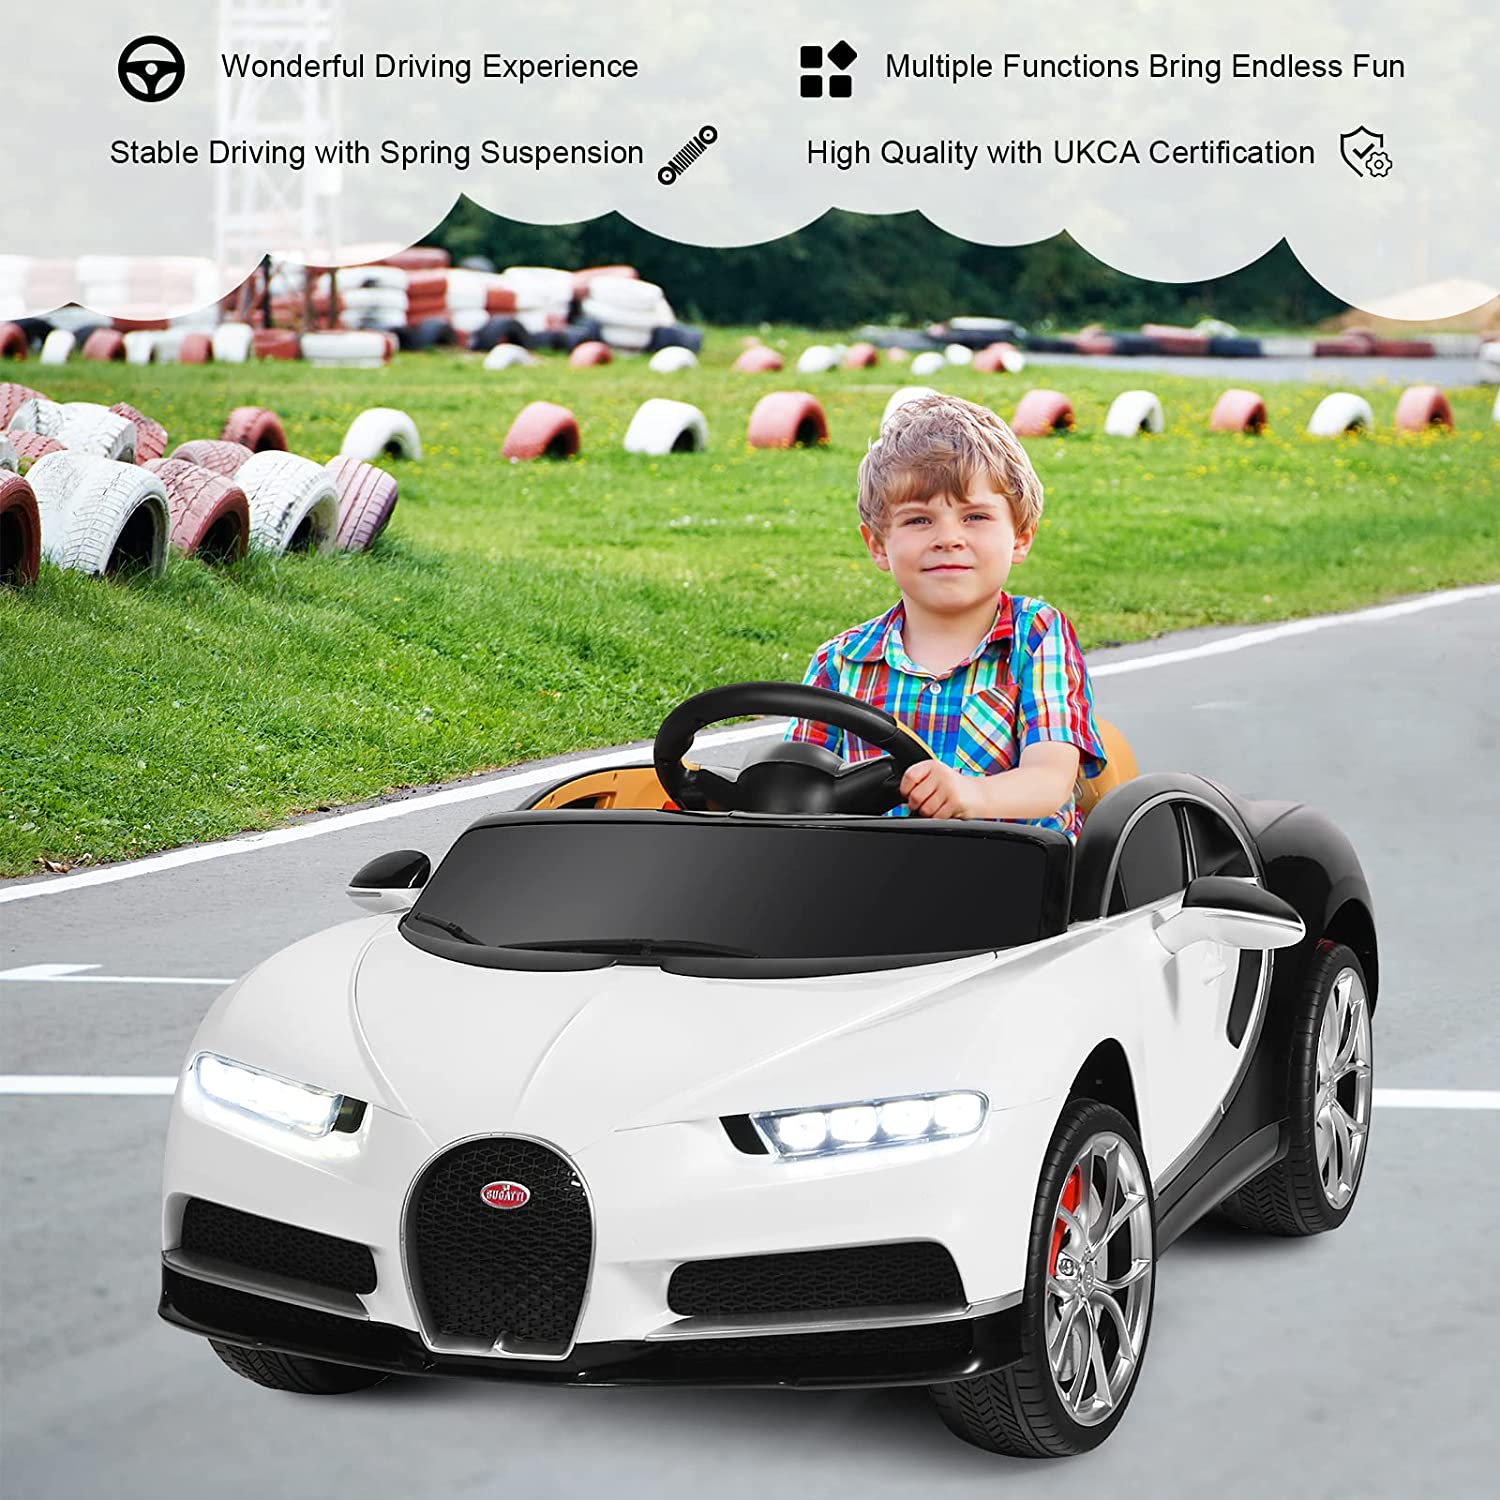 12V Kids Licensed Battery Powered Vehicle with Remote Control-White